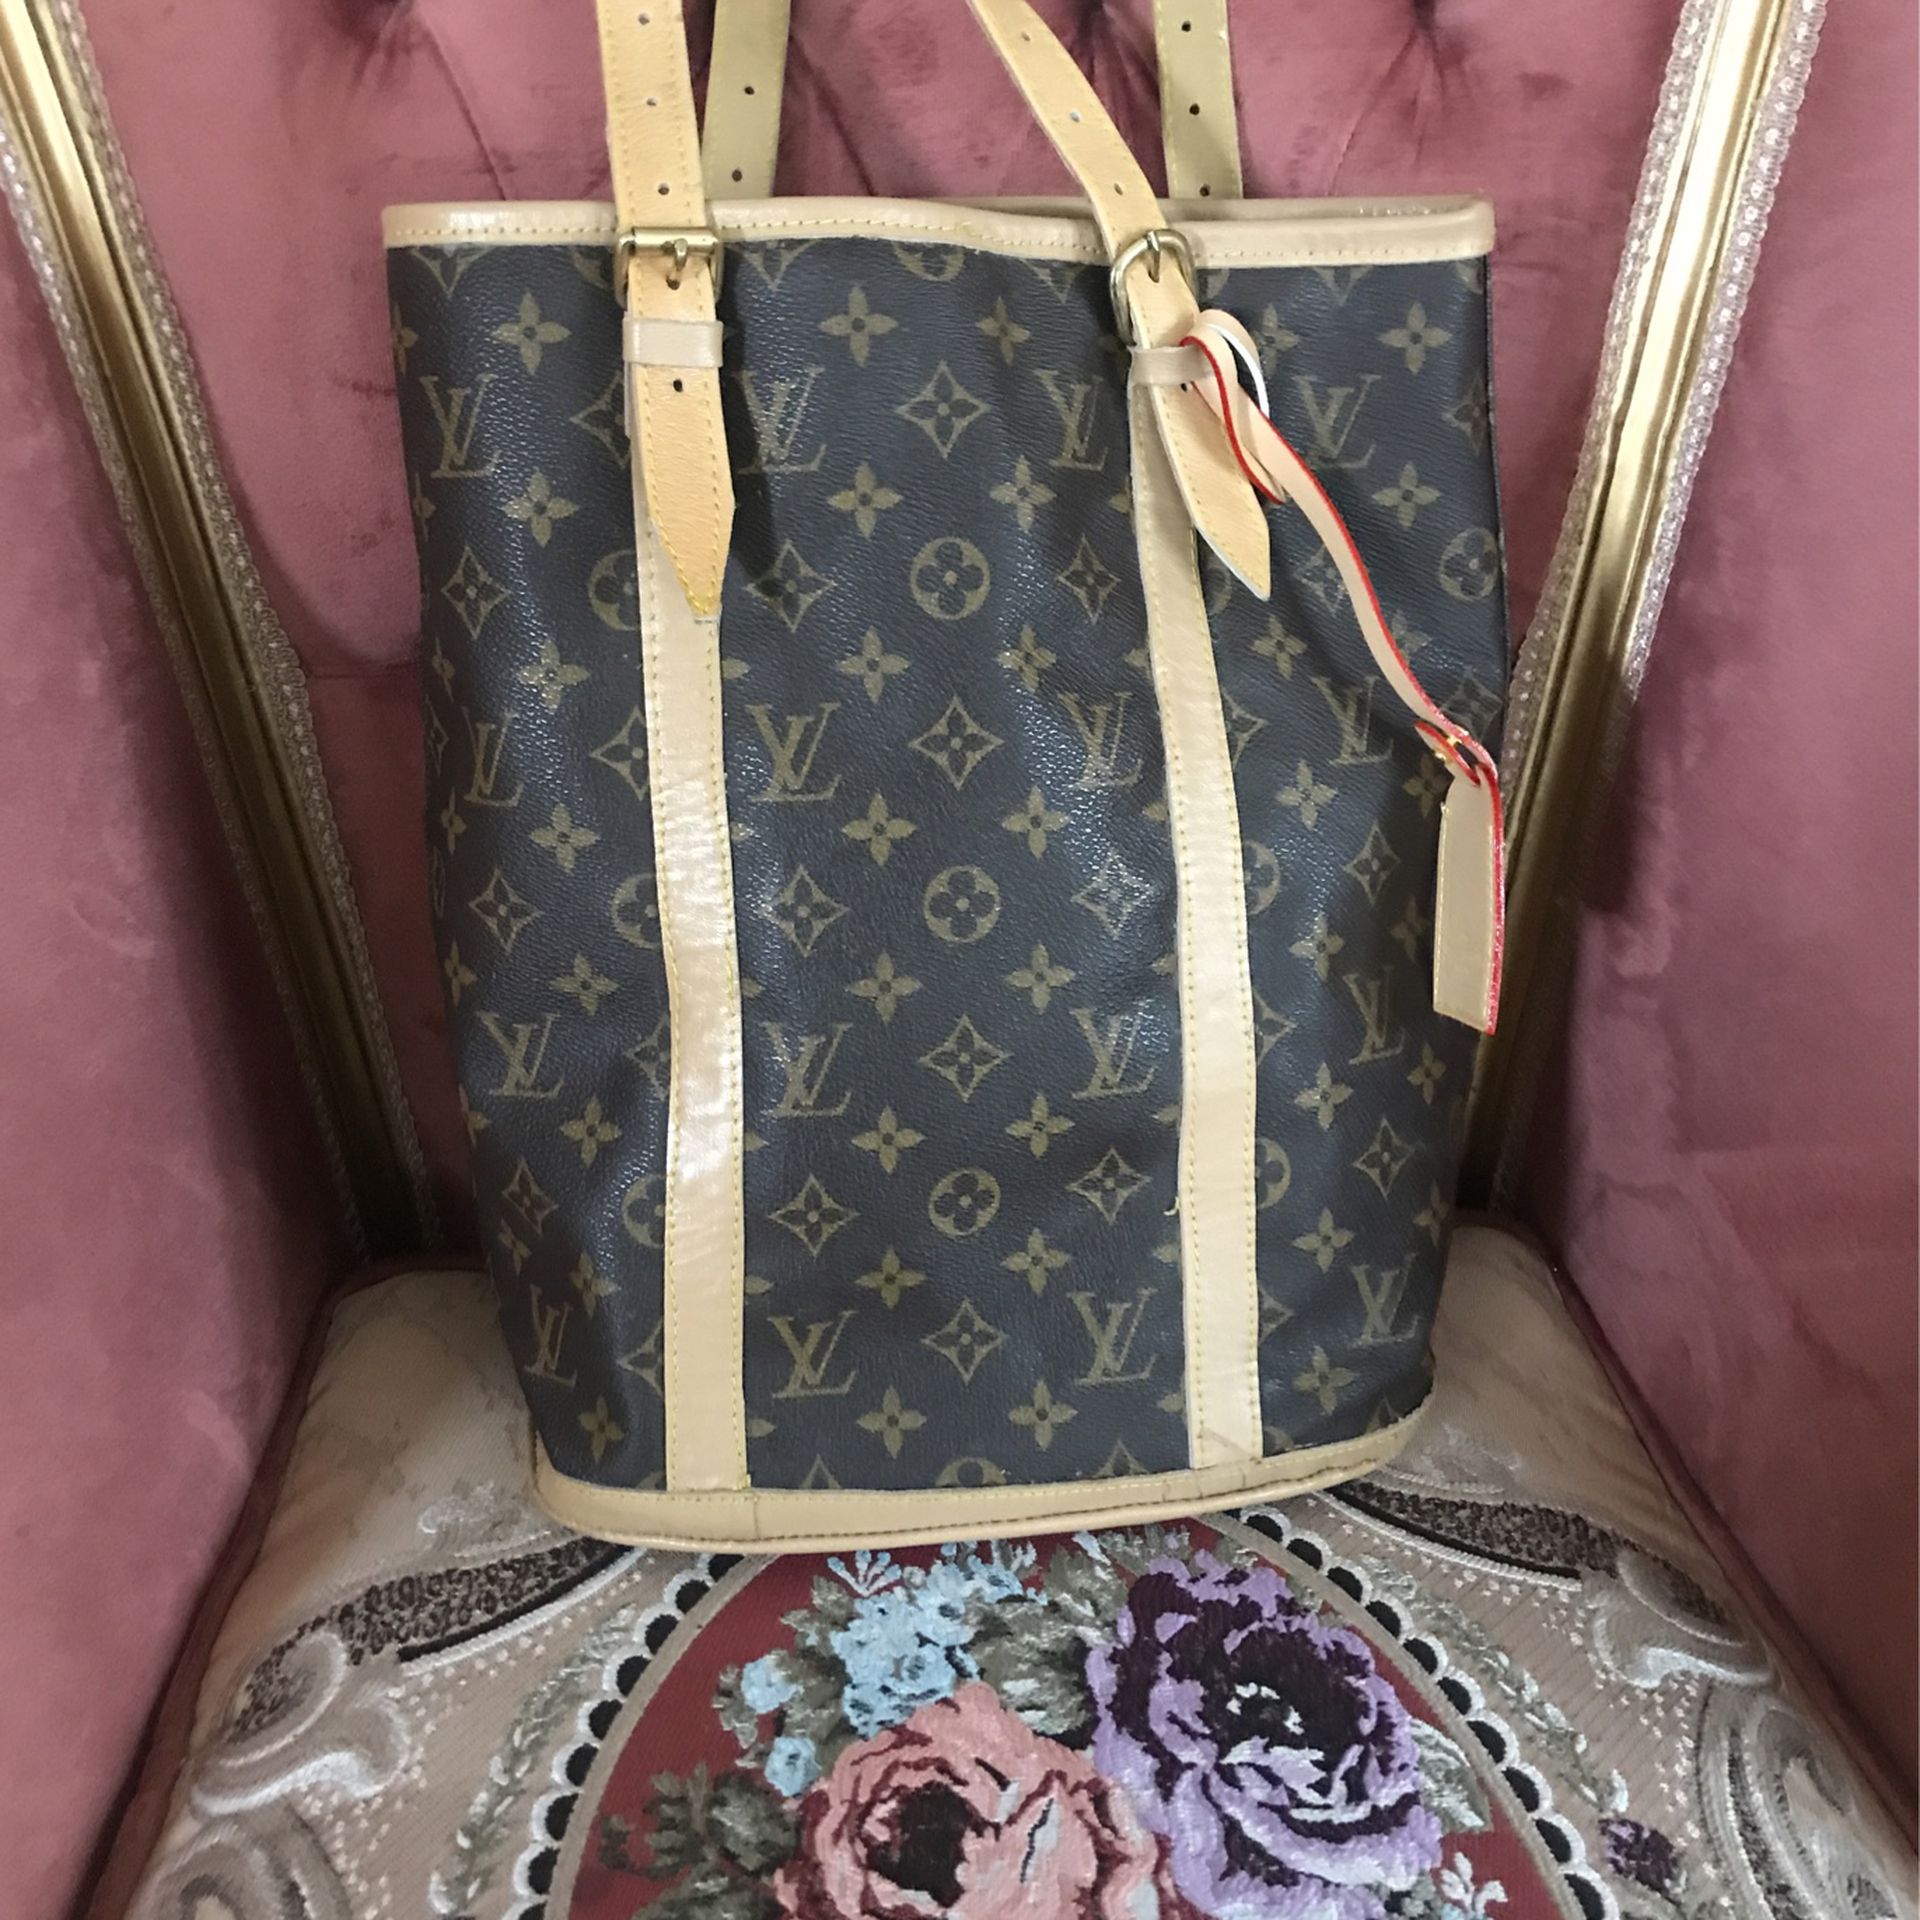 Authentic Louis Vuitton Bucket Bag for Sale in Uppr Marlboro, MD